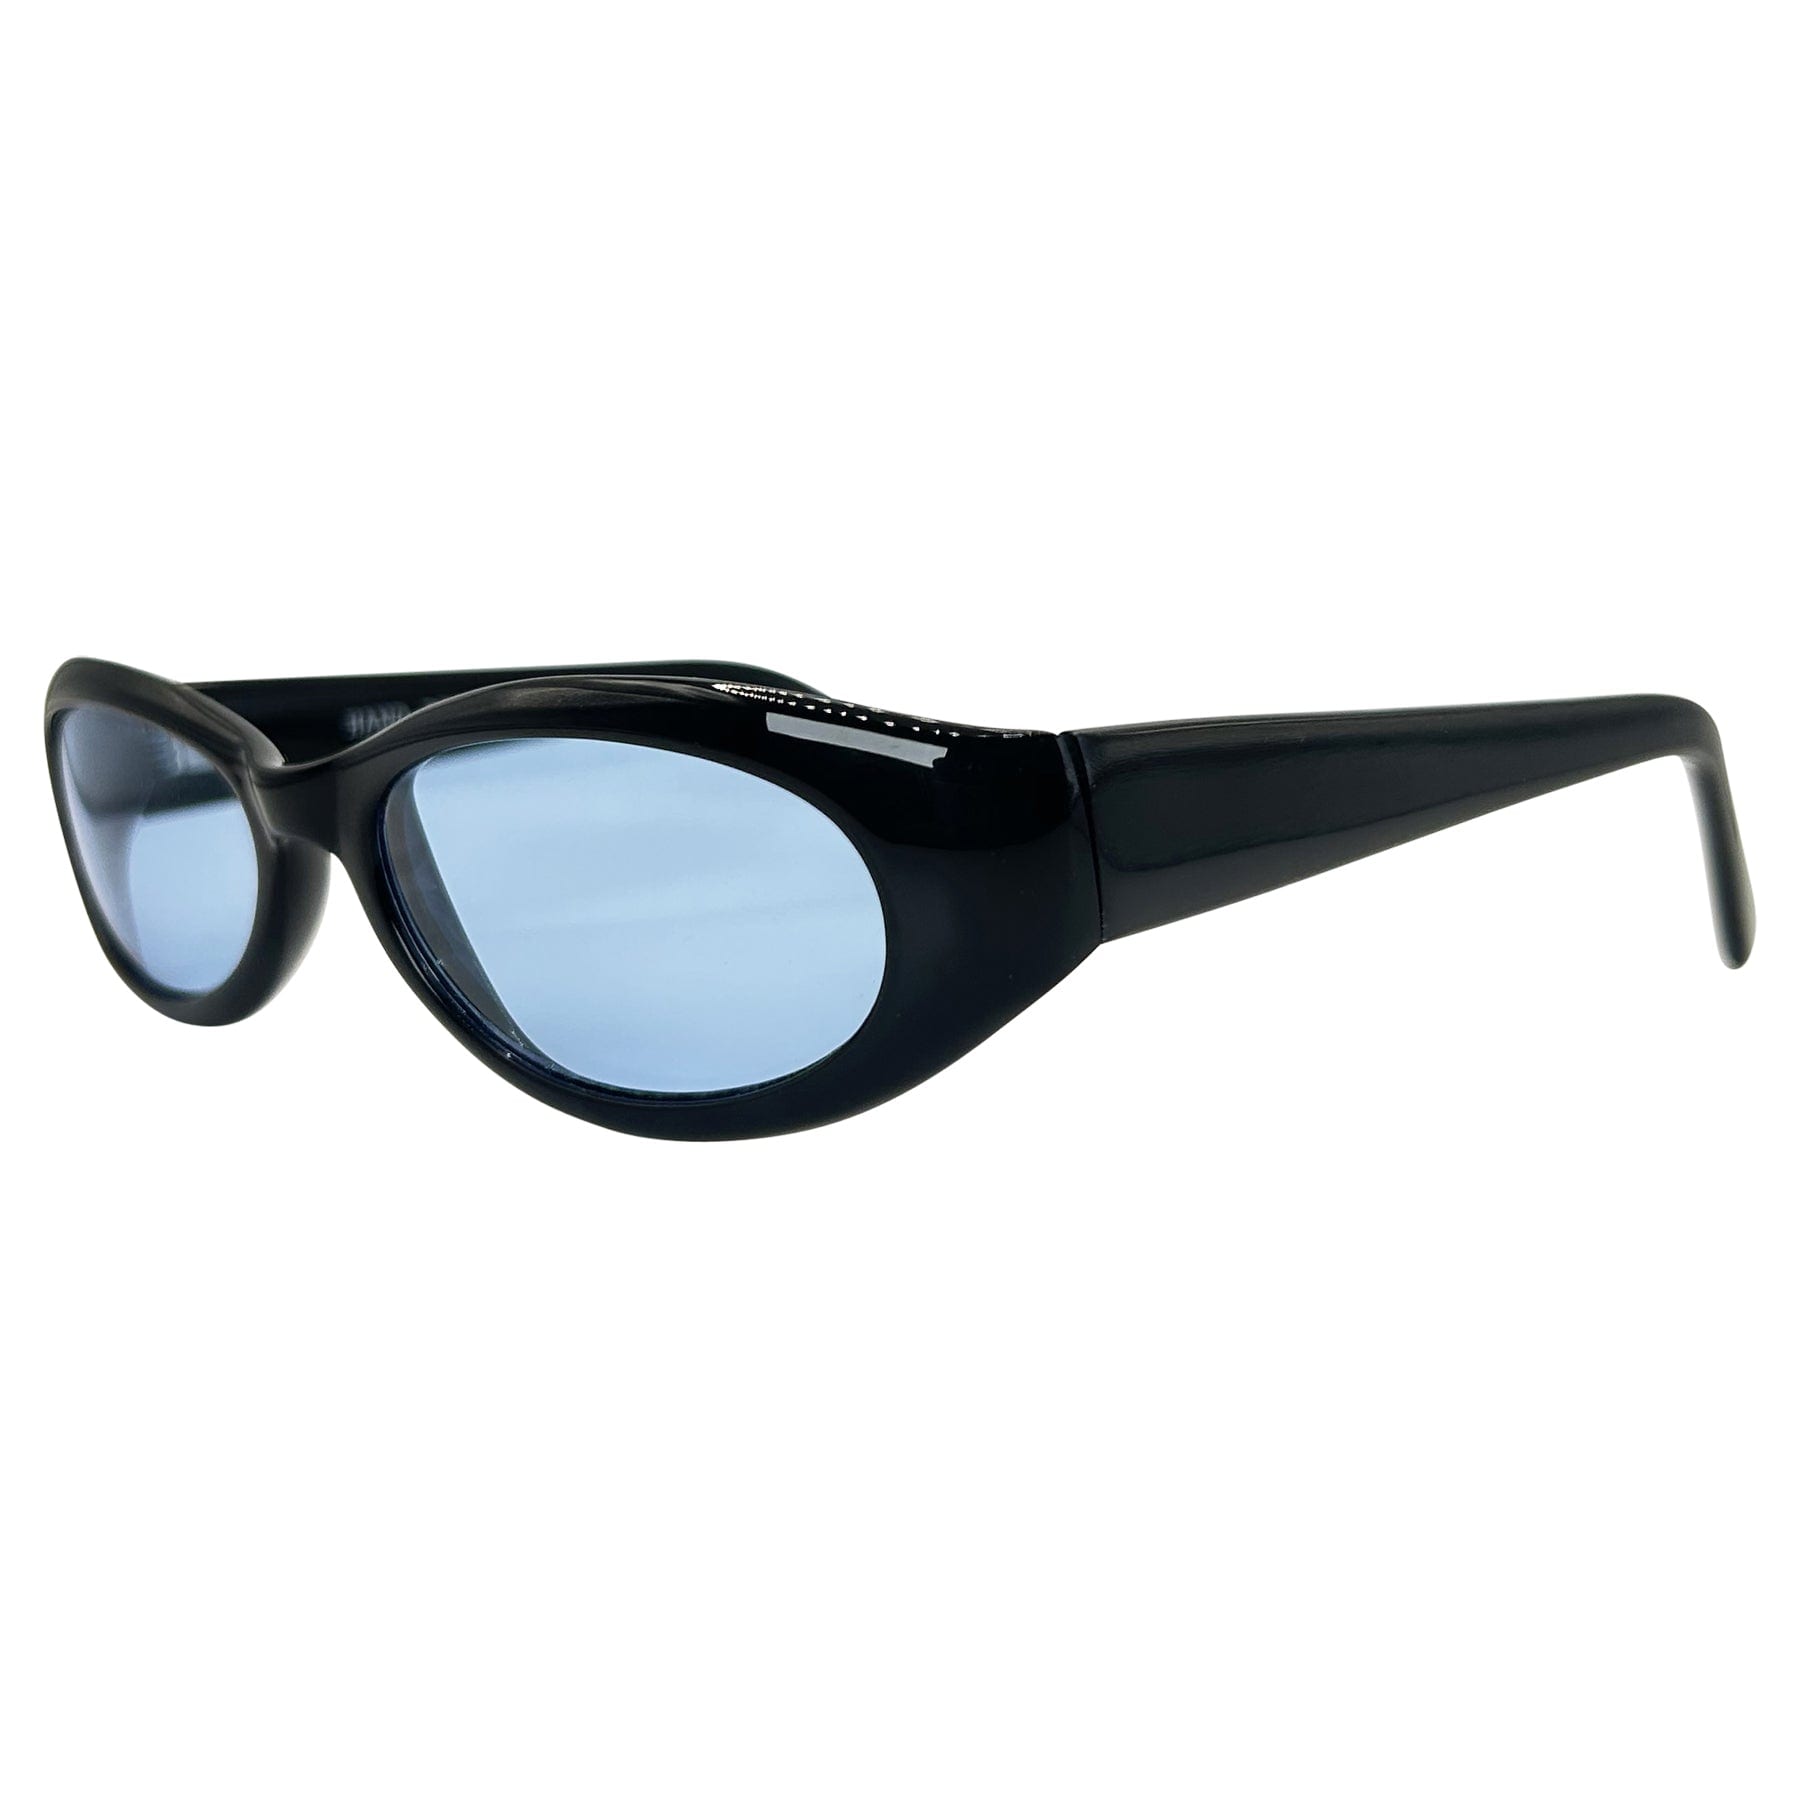 funky colorful sunglasses with a black frame and blue lens